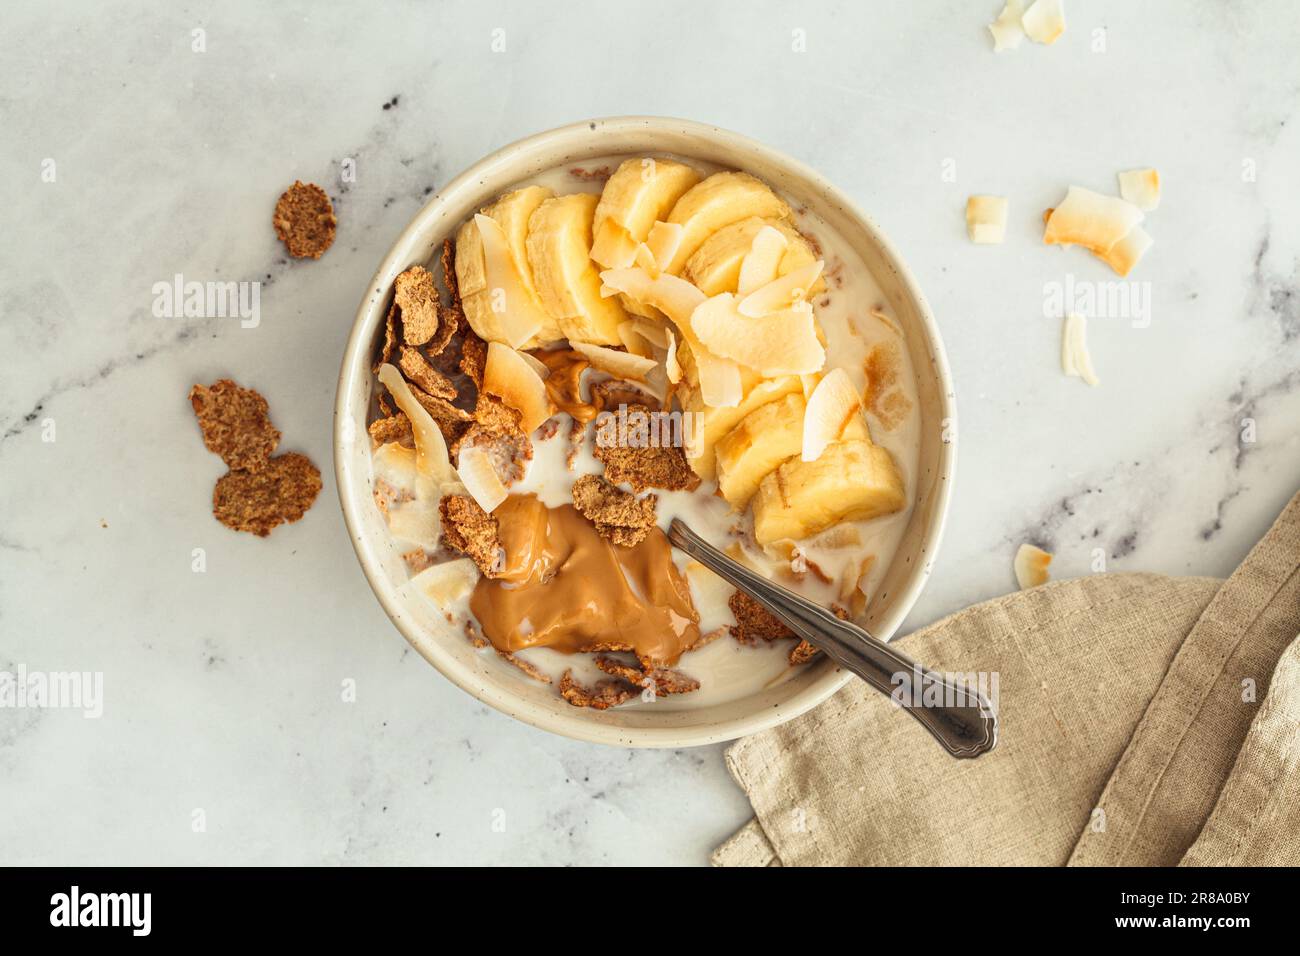 Whole grain flakes with banana, coconut chips and peanut butter in a bowl, white background, top view. Healthy breakfast concept. Stock Photo